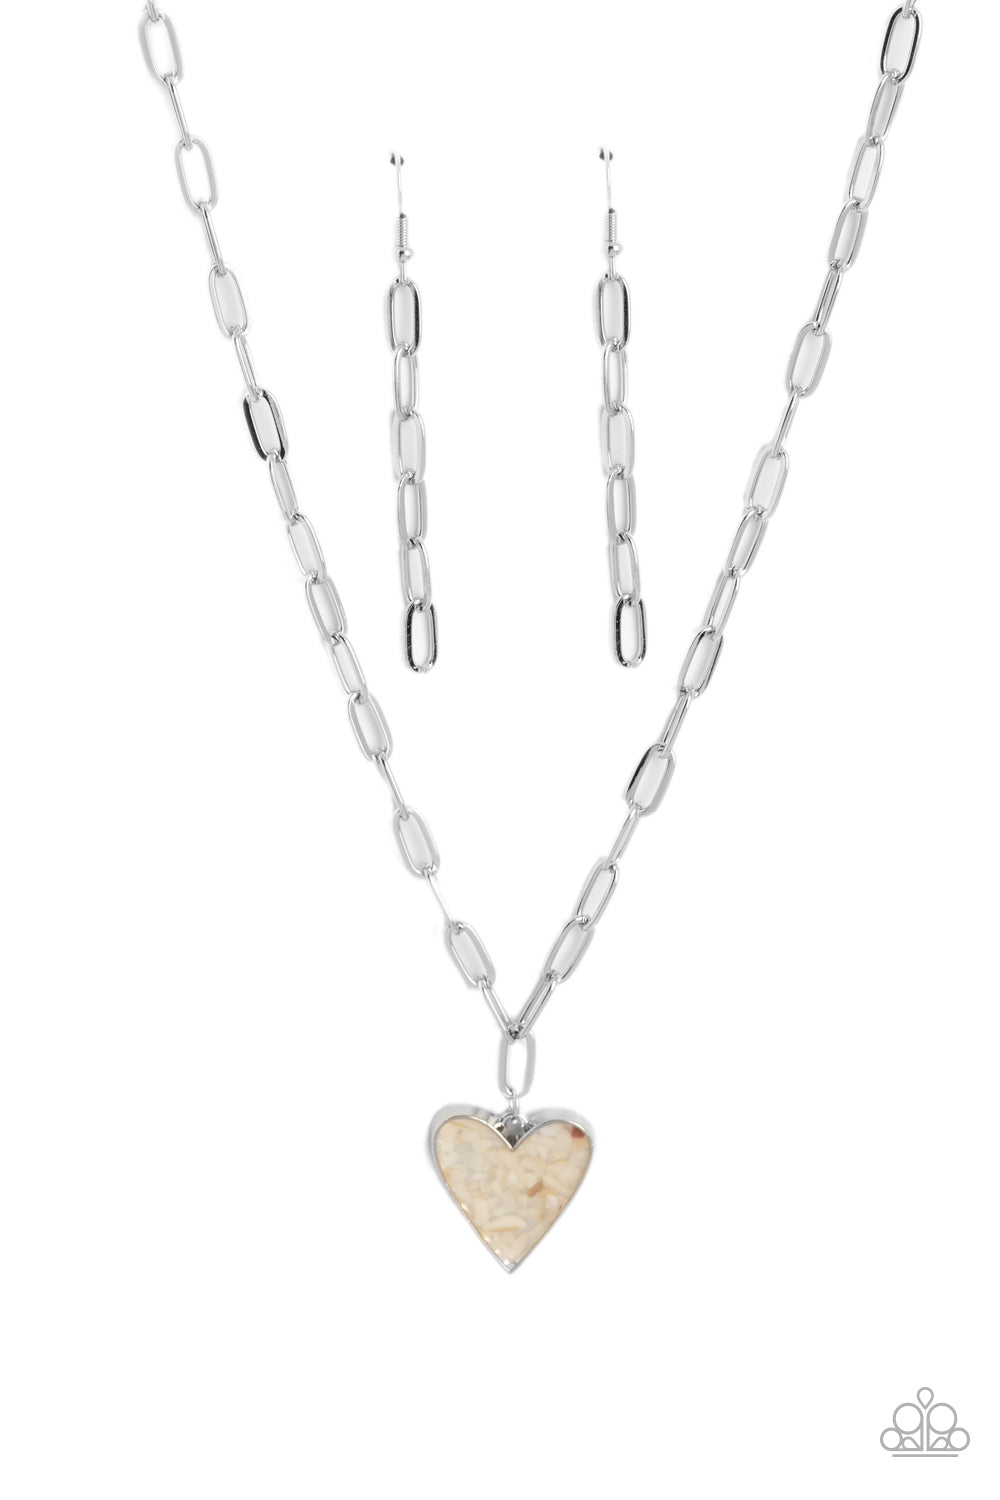 Kiss and SHELL - White Necklace